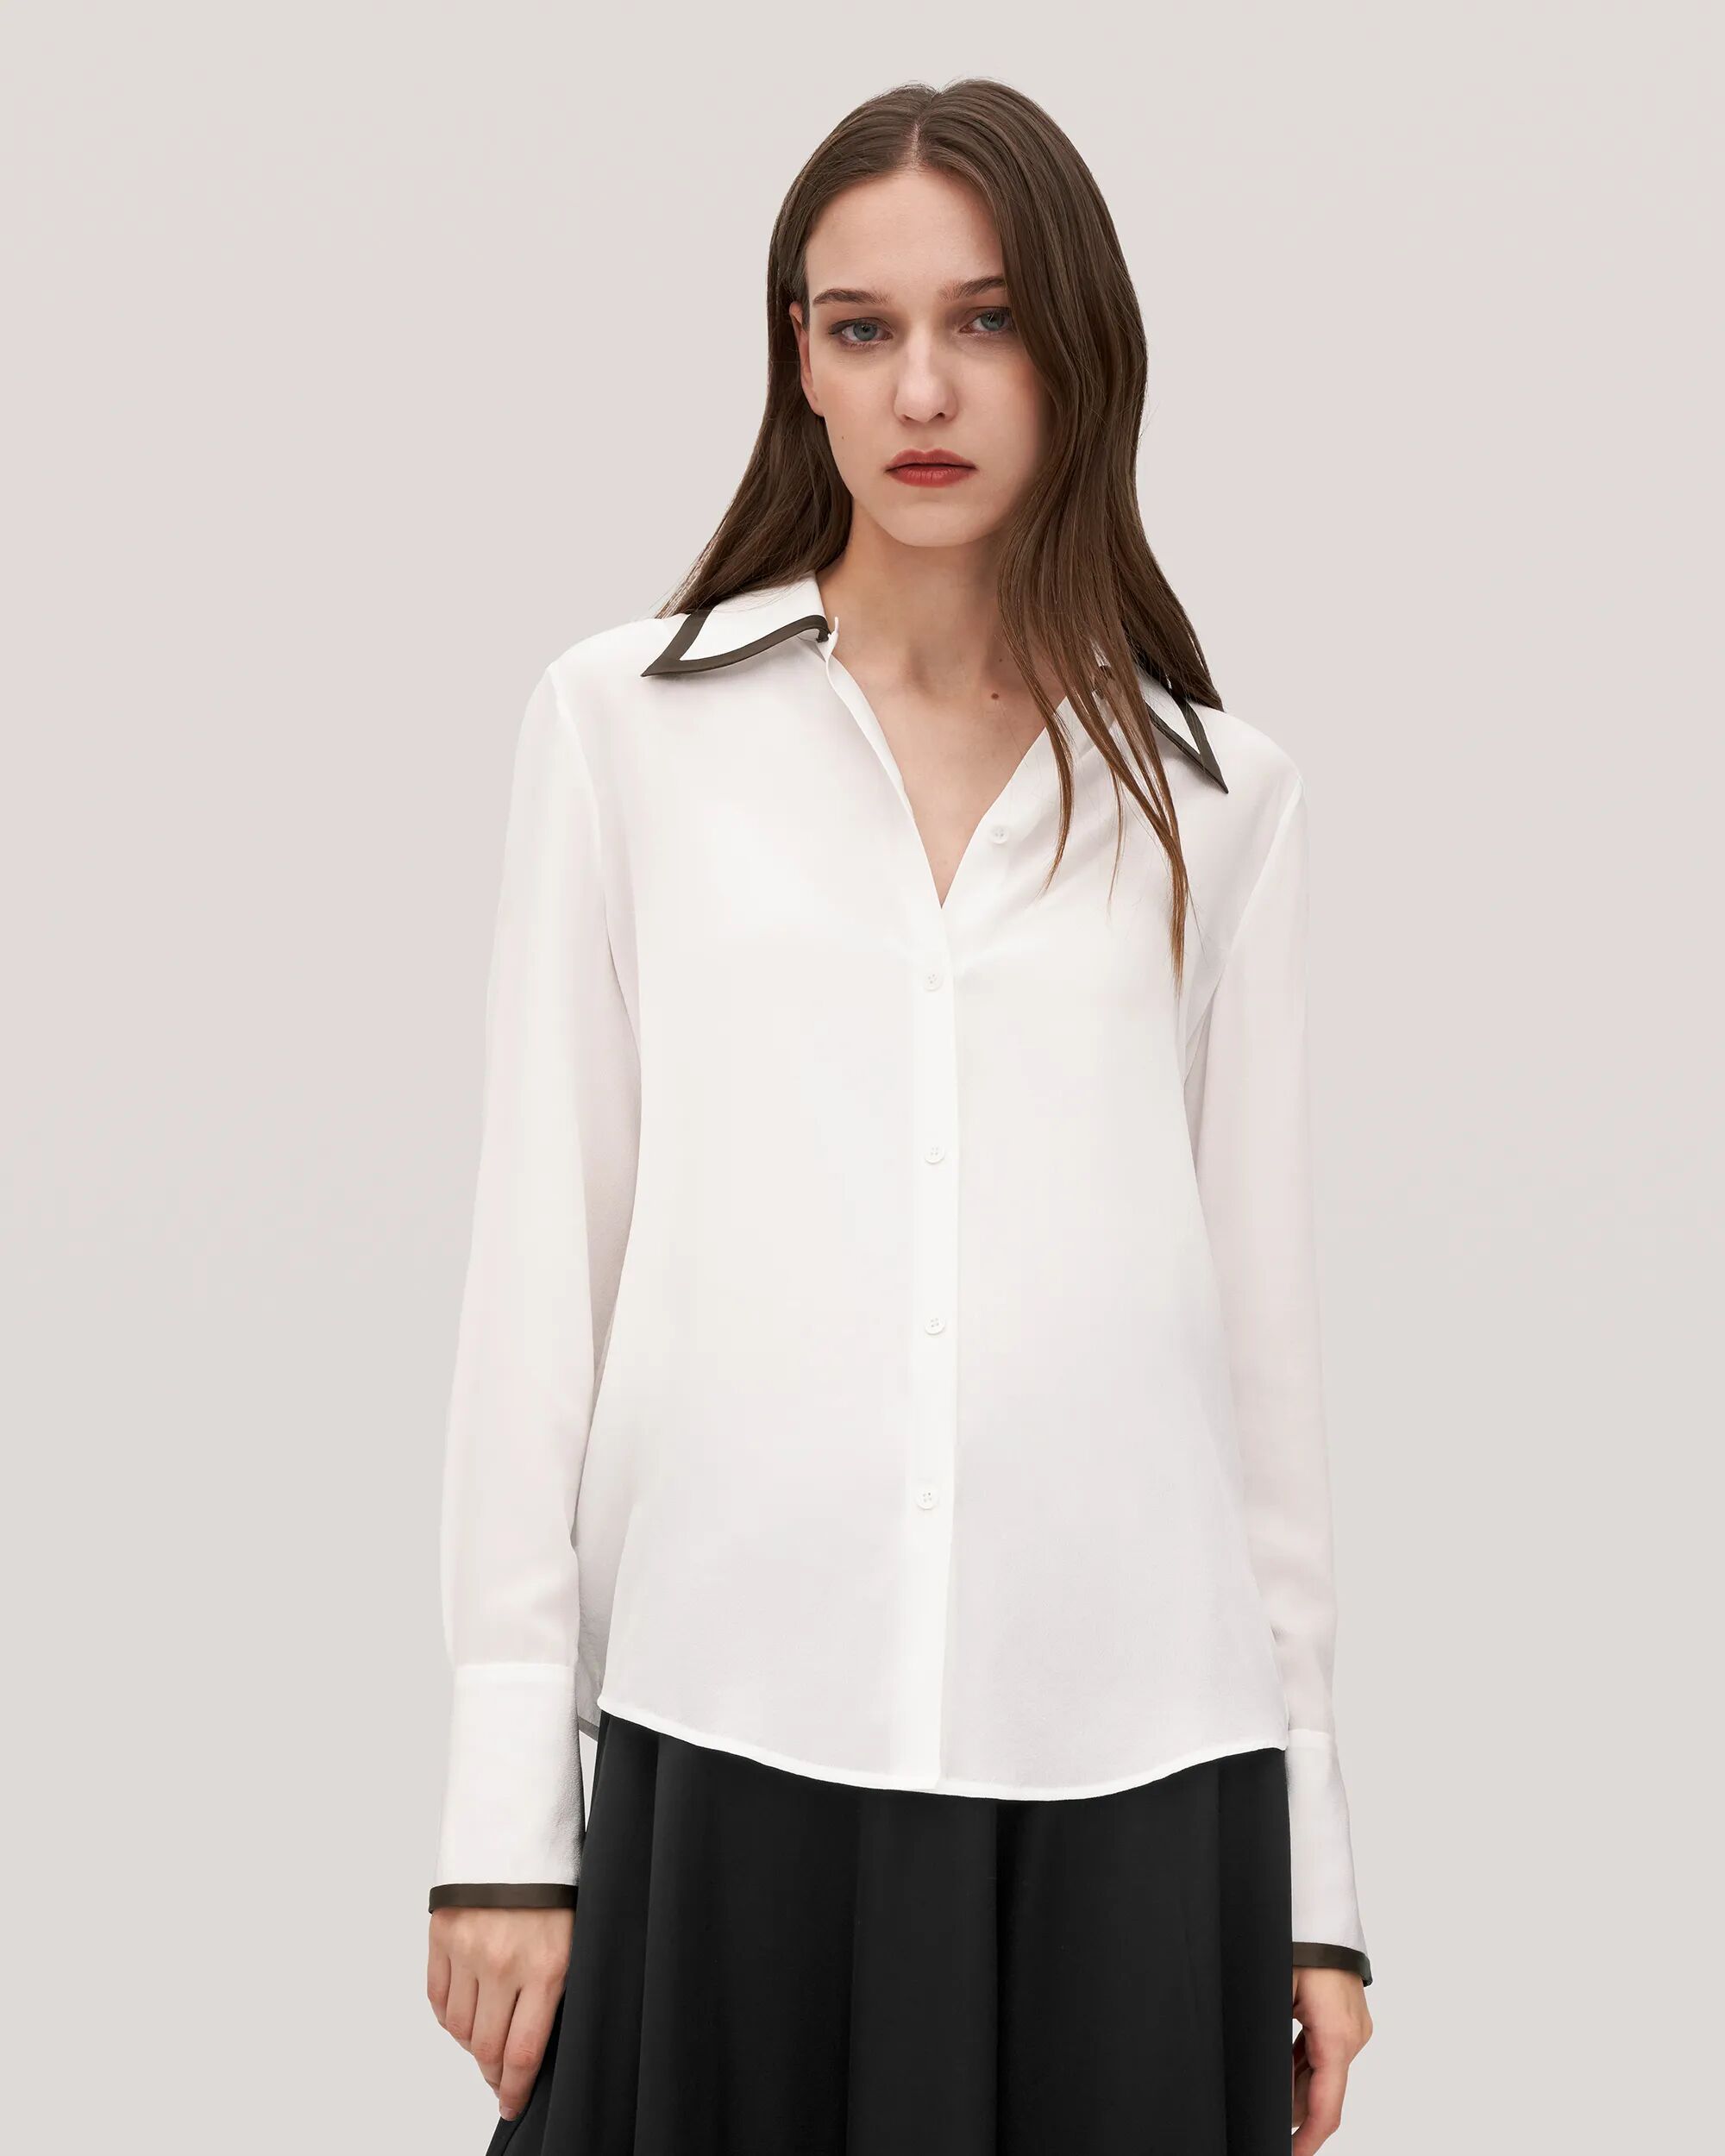 LILYSILK Business White Shirt With A Black Collar And Cuffs   Silk Striped   New Arrivals Contrast Piping Willow Natural Lightweight Regular Fit